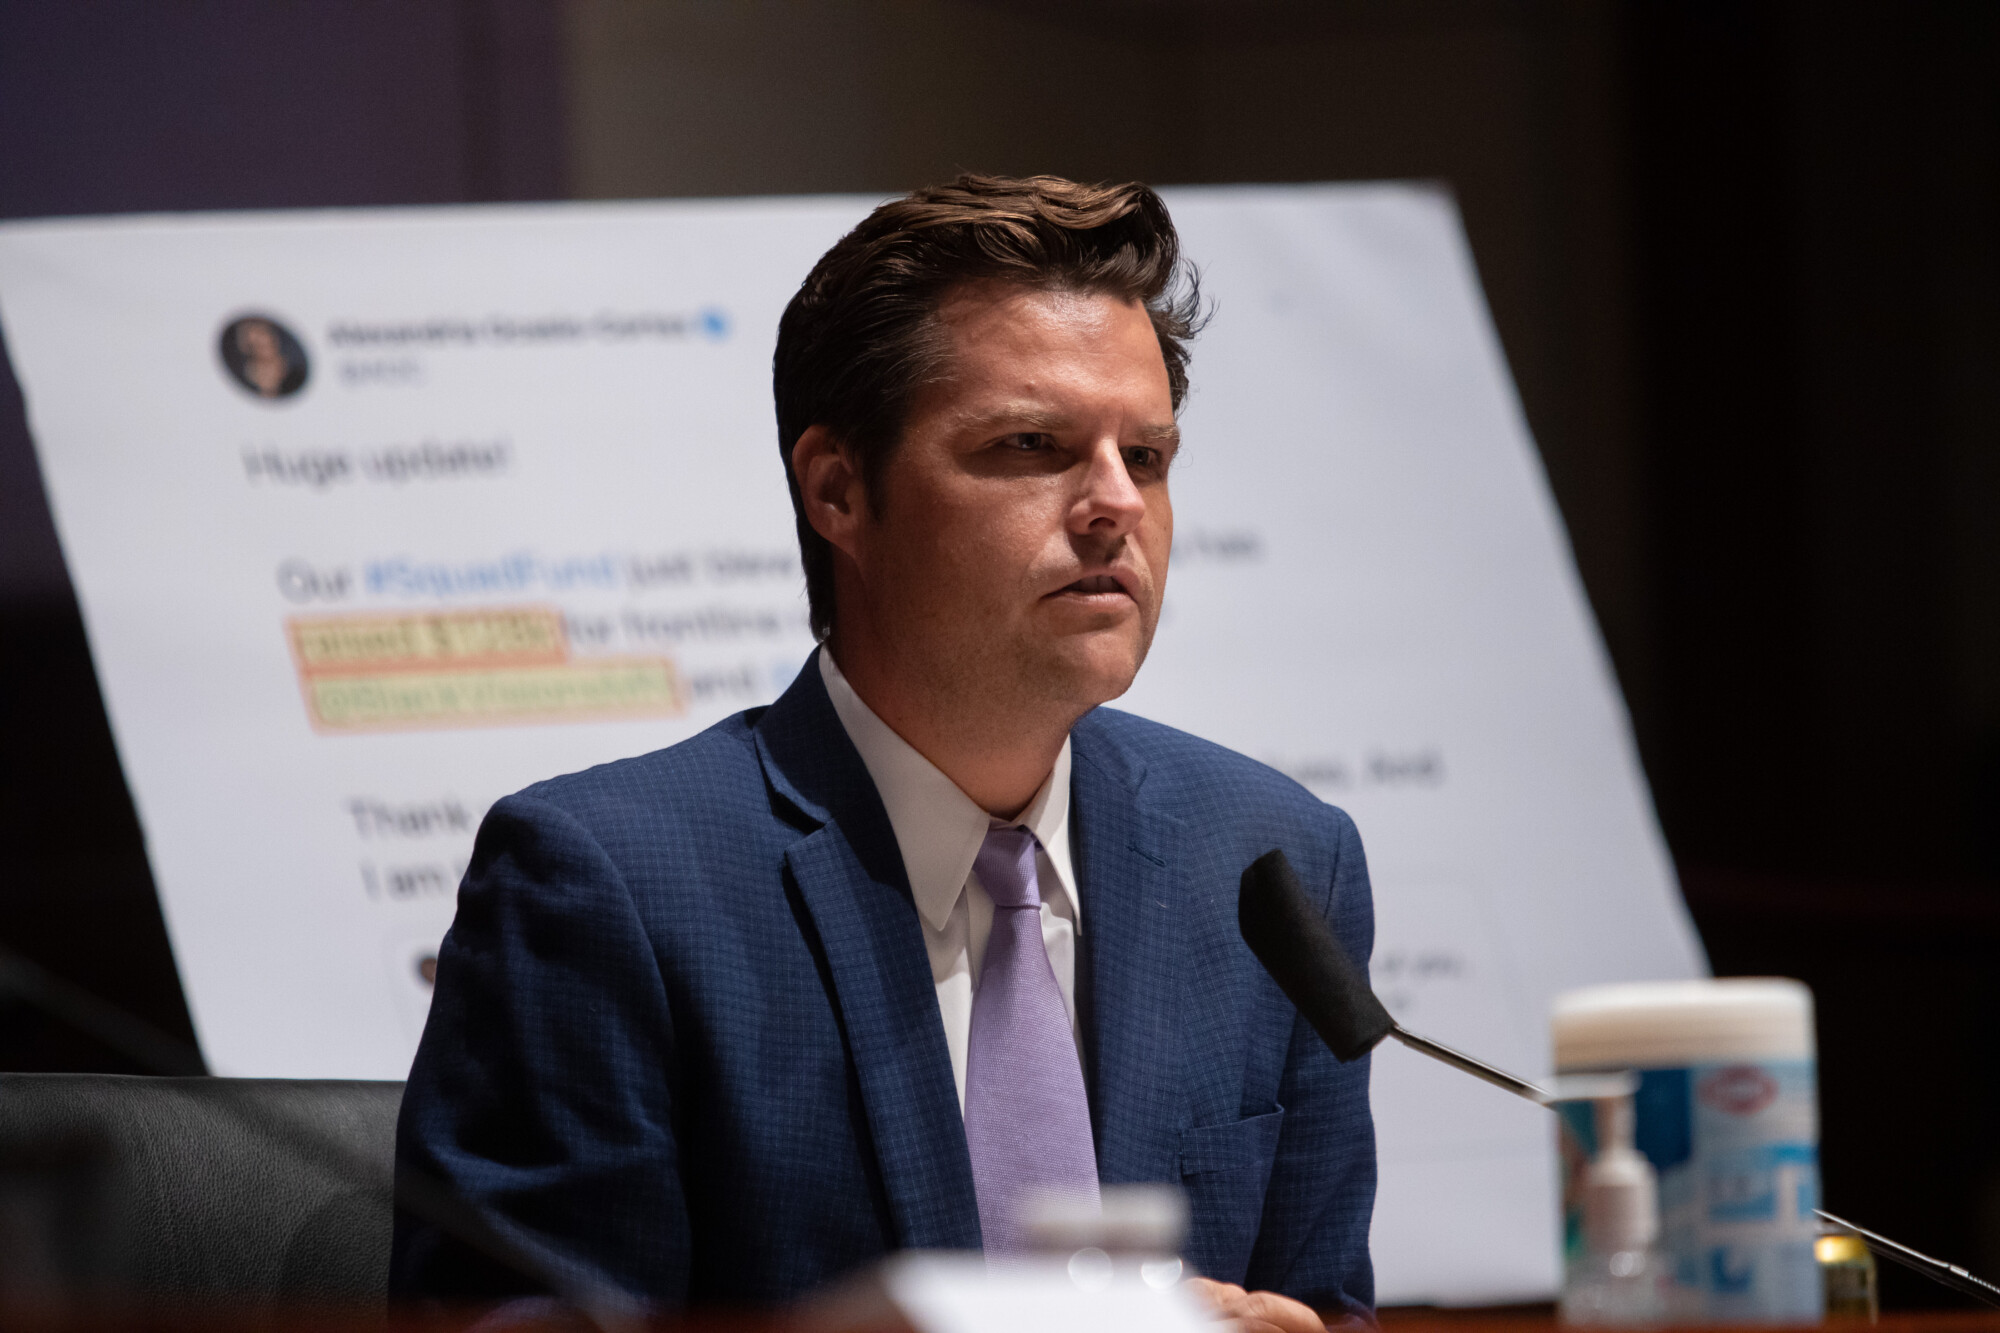 Trump Not Resigning, Will ‘Not Leave the Public Stage at All:’ Gaetz